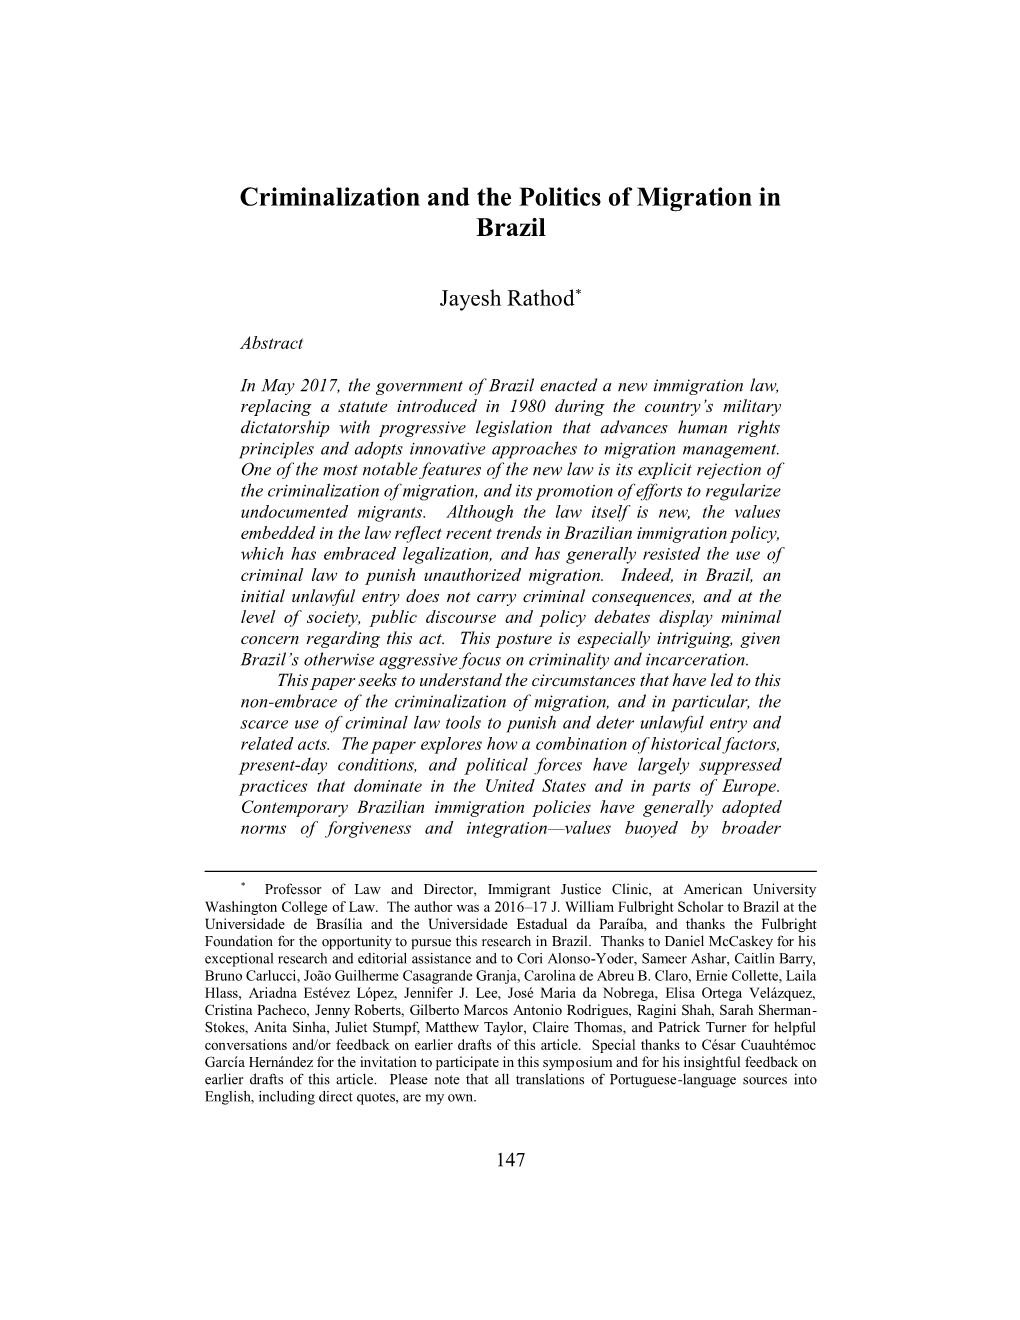 Criminalization and the Politics of Migration in Brazil